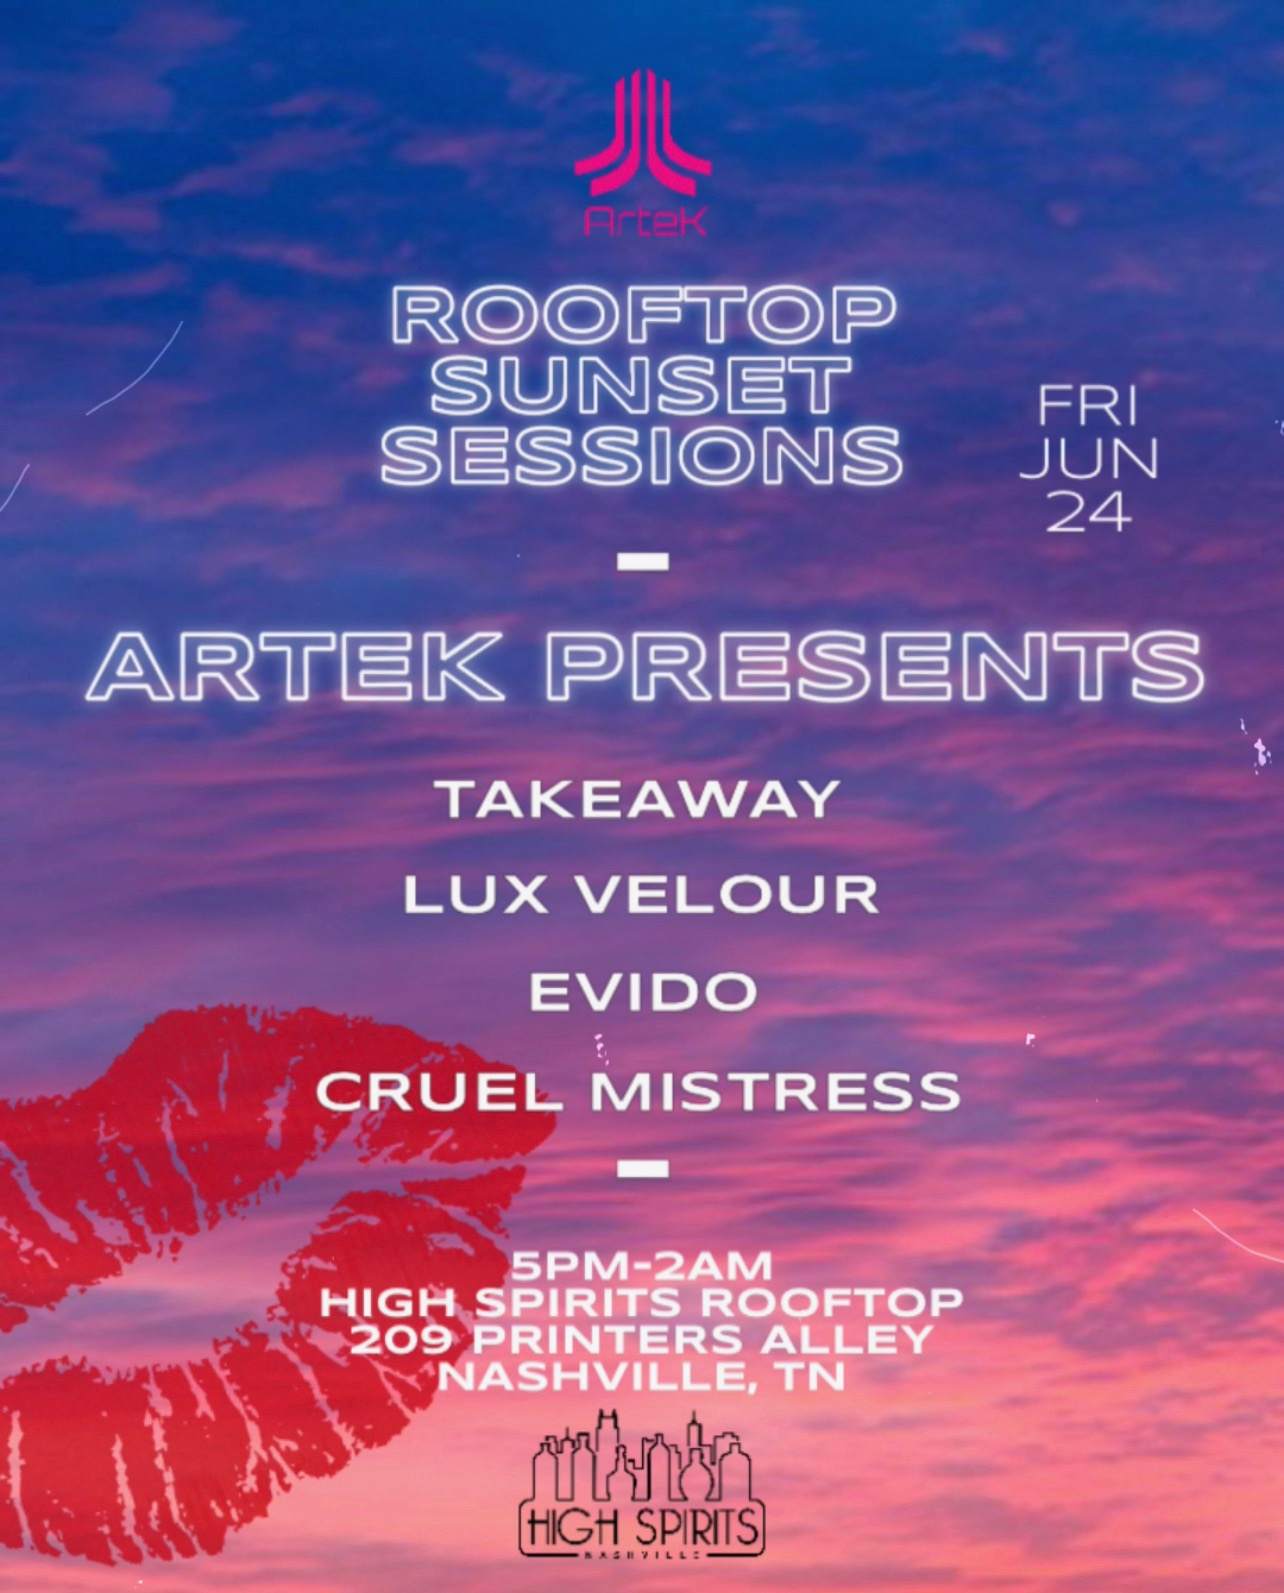 Rooftop Sunset Sessions with ArteK Presents Nashville - フライヤー表